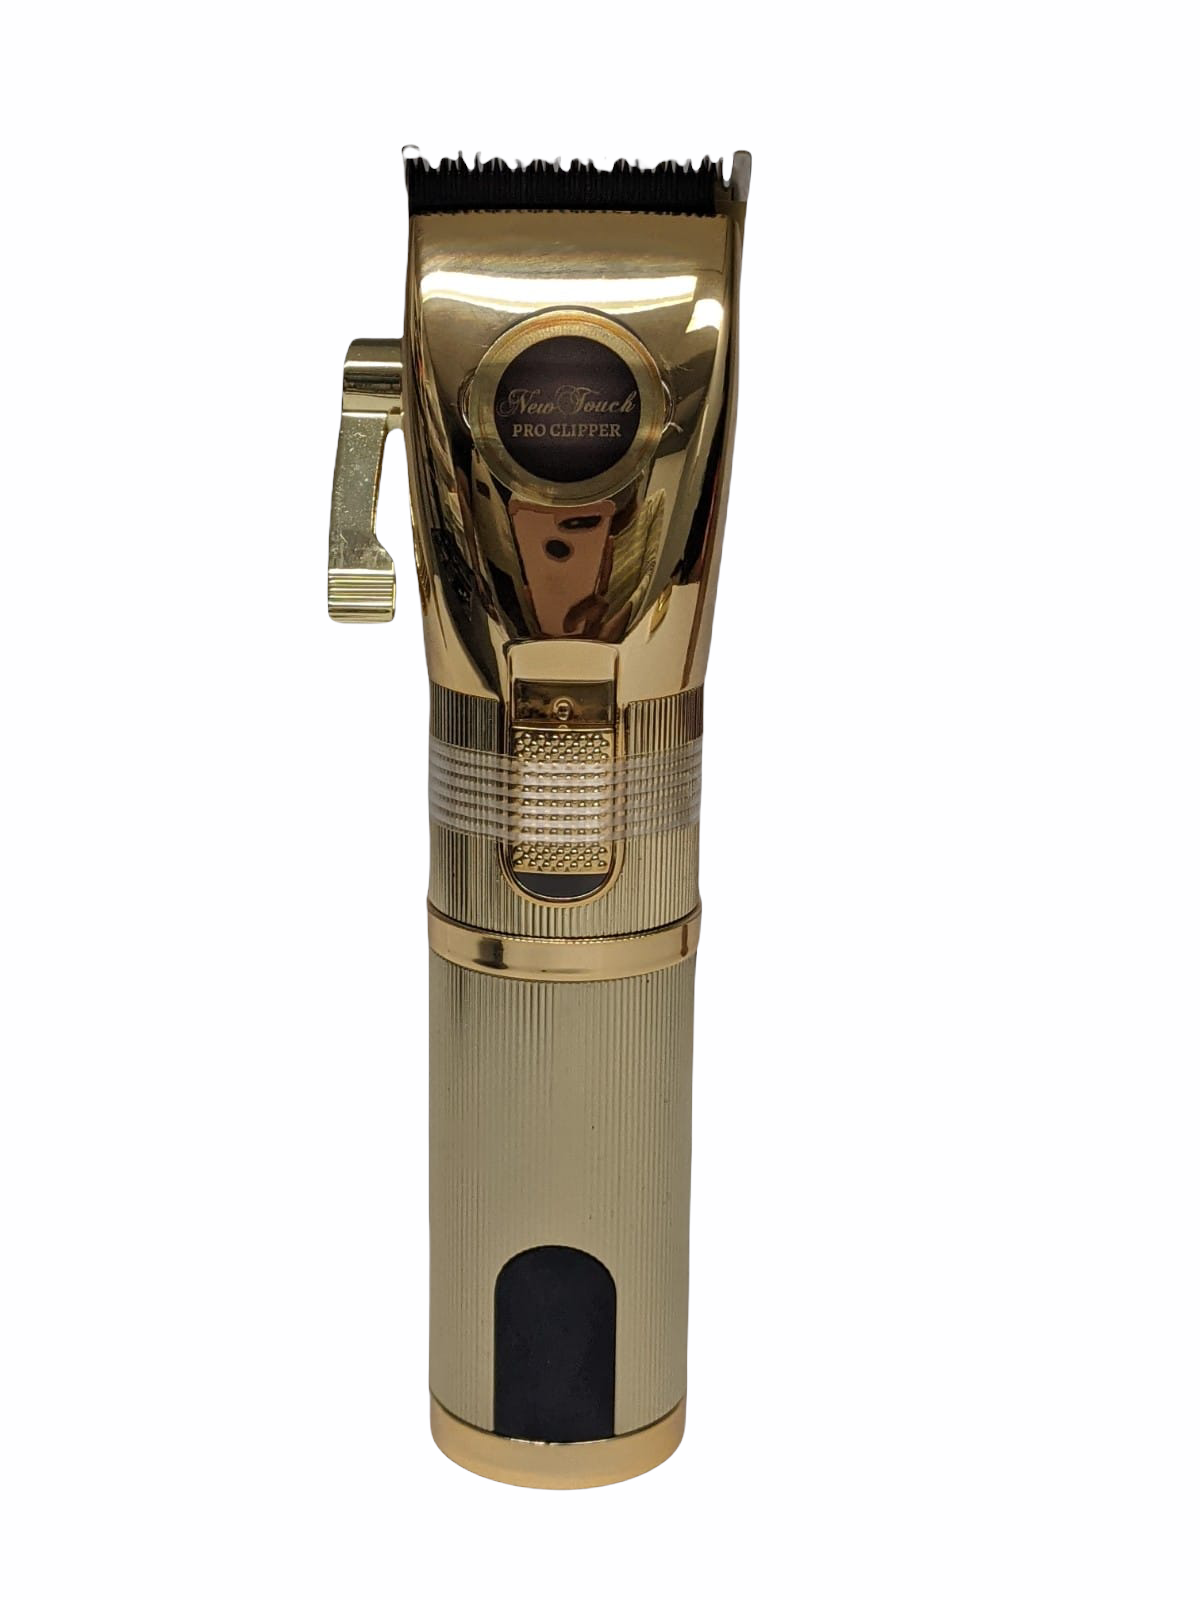 NEW TOUCH Premium Gold 2 Speed Clipper